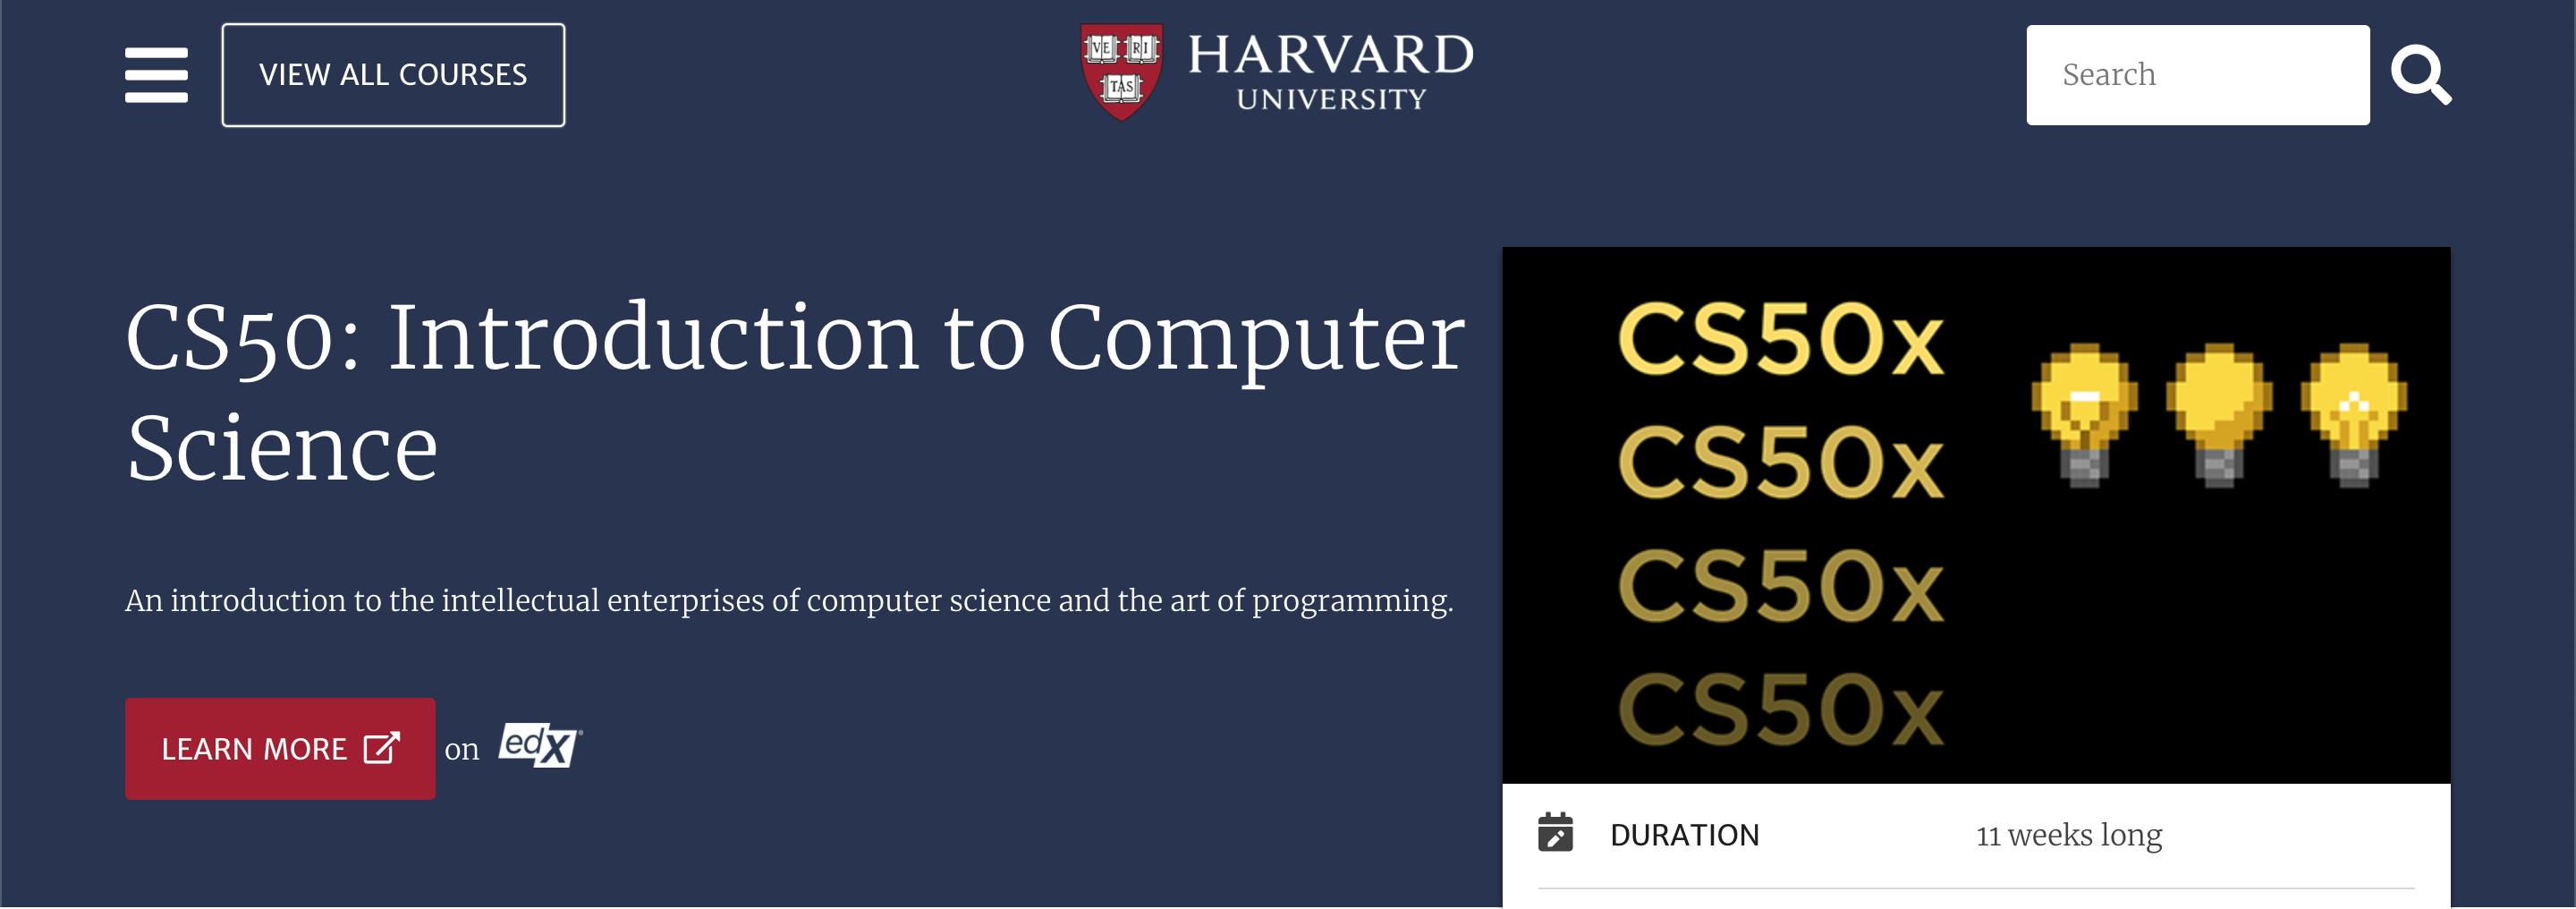 CS50: Introduction to Computer Science